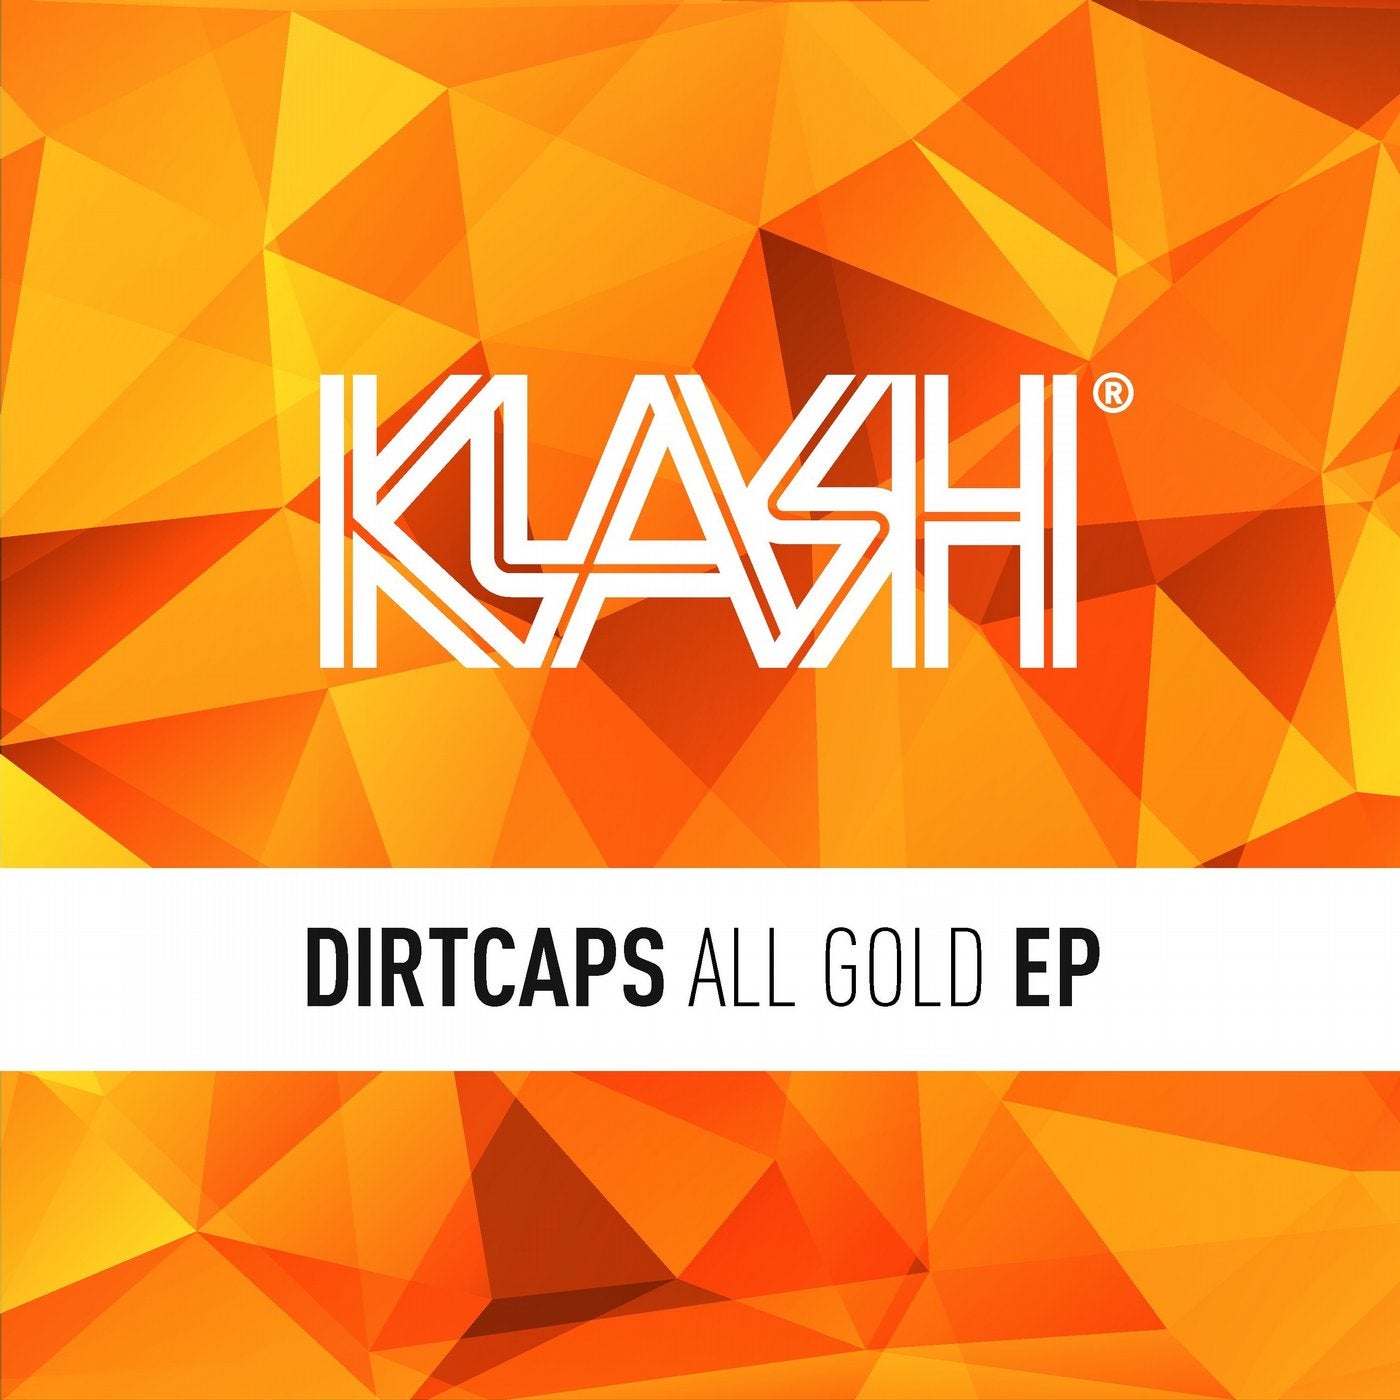 All Gold EP